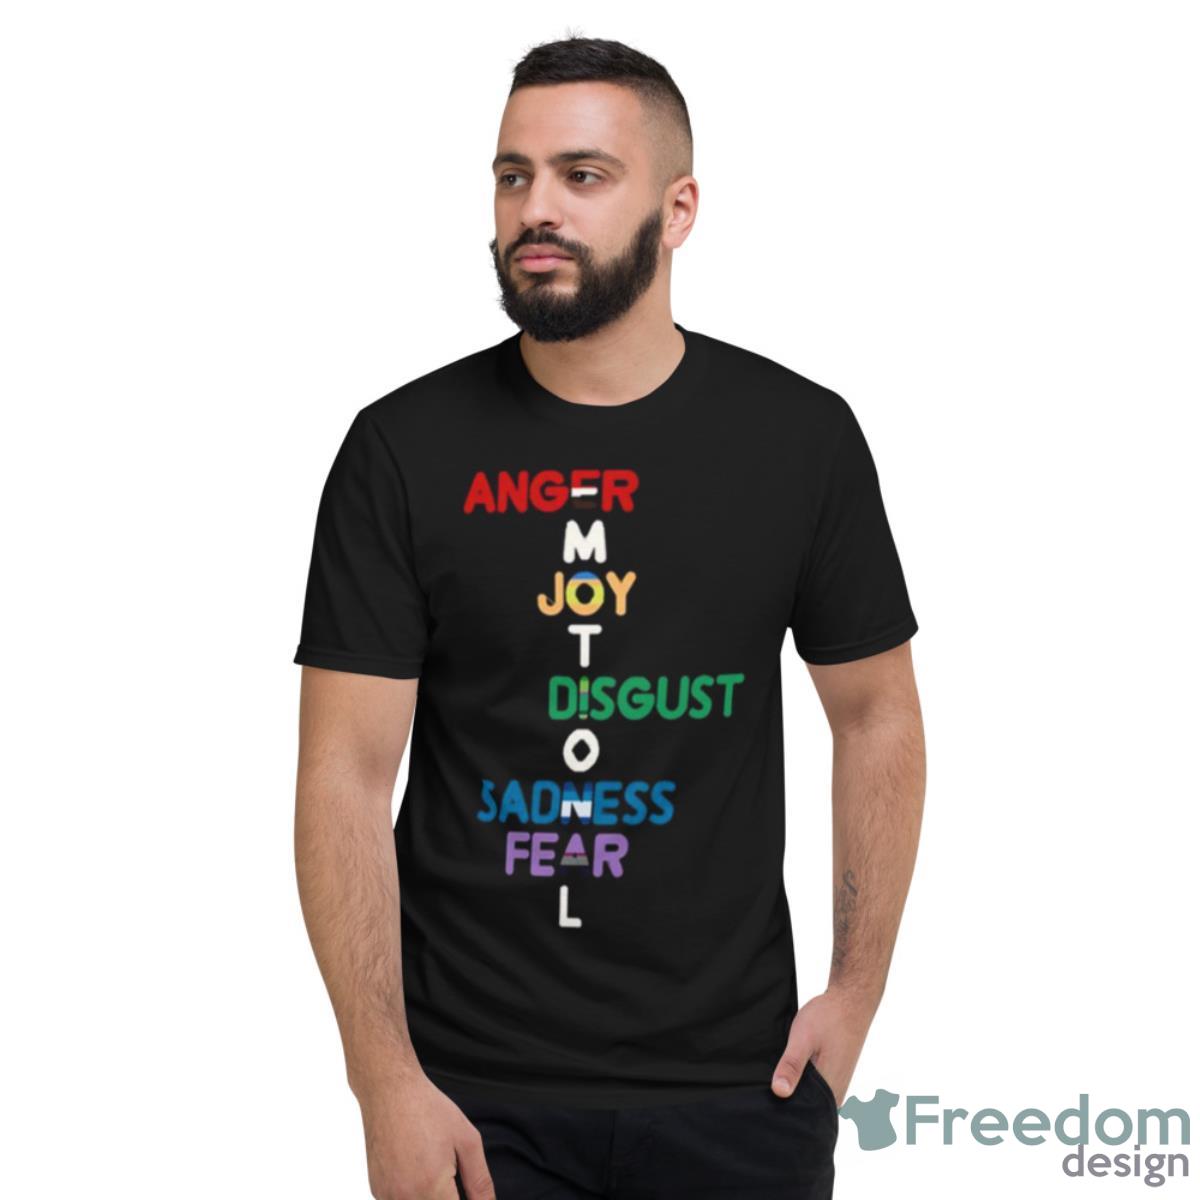 Anger Disgust Sadness Fear Inside Out Emotion Shirt - Freedomdesign